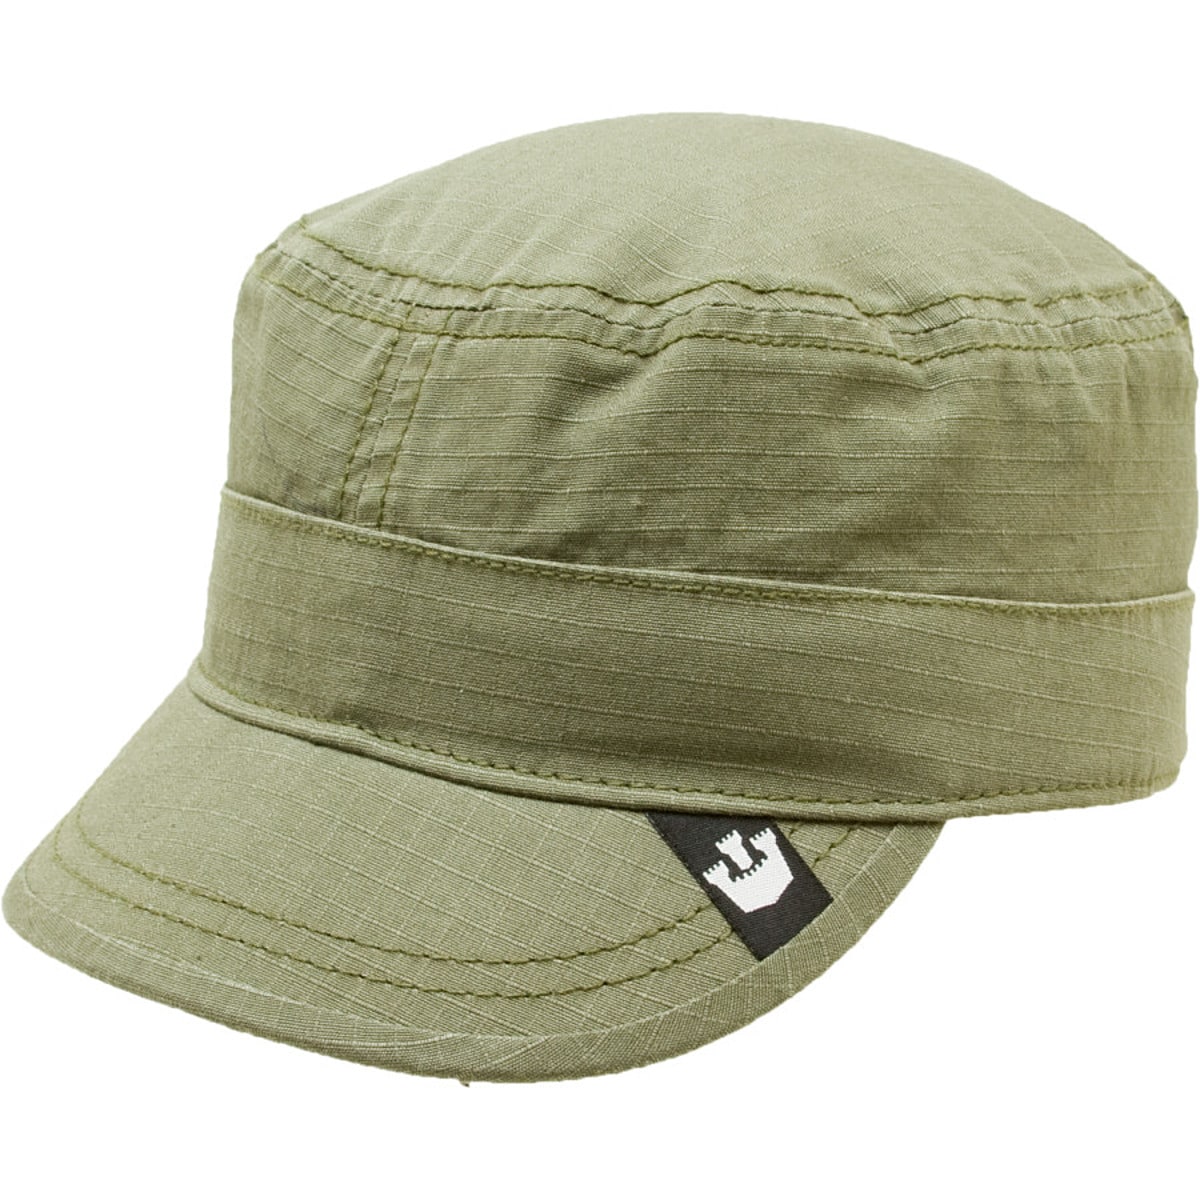 Goorin Brothers Private Cadet Hat Olive, L